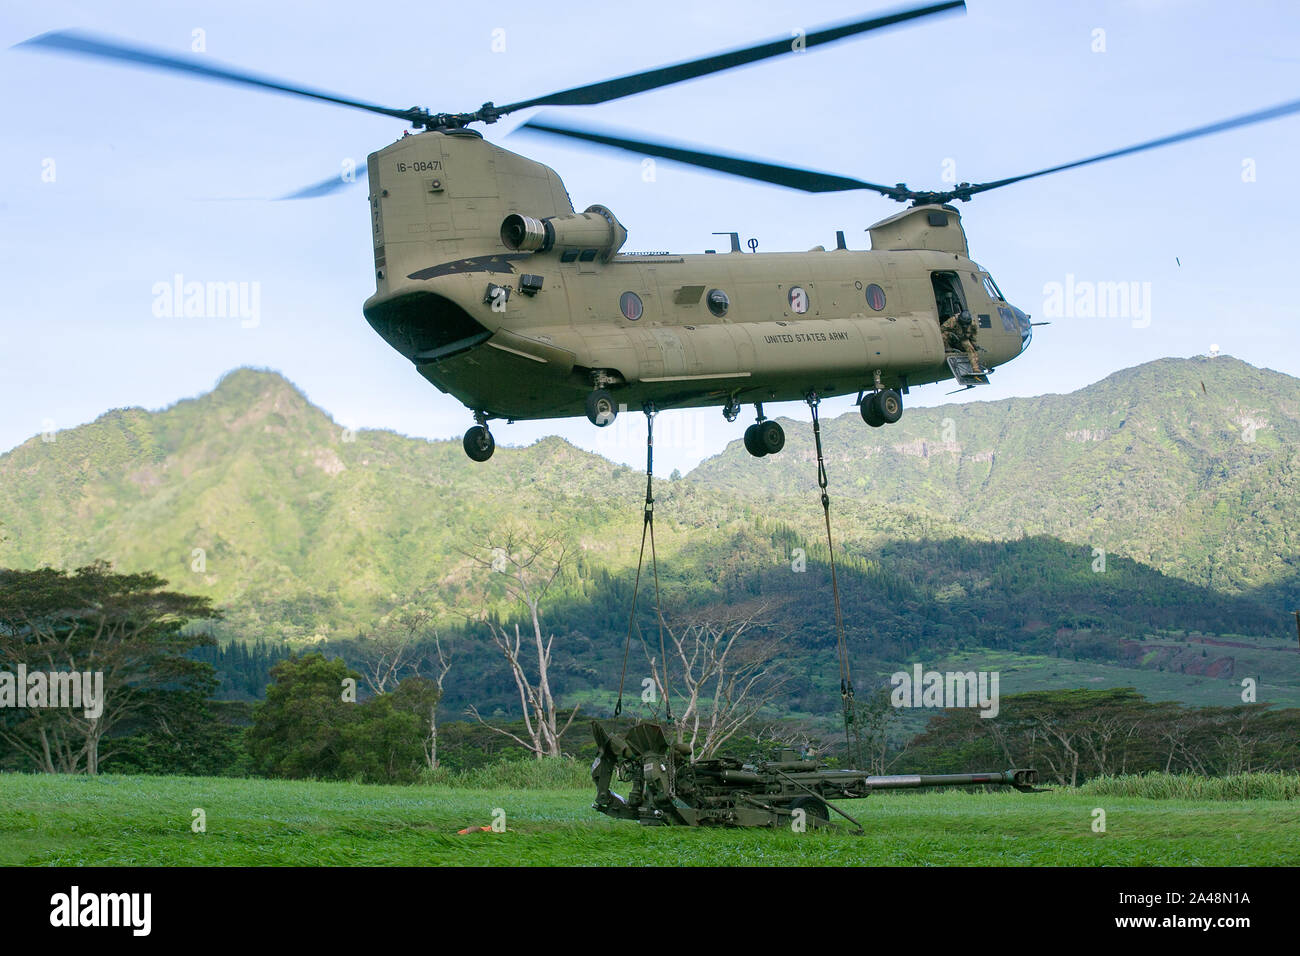 U.S. Army CH-47 Chinook helicopter assigned to 3rd Battalion, 25th Aviation Regiment provides air and troop lift capability during a live-fire air assault artillery raid on Schofield Barracks, Hawaii, October 10, 2019. The 25th Combat Aviation Brigade worked alongside Charlie Battery, 2nd Battalion, 11th Field Artillery Regiment on the first live-fire air assault of M777 Howitzers ever conducted on the island of Oahu. (U.S. Army photo by 1st Lt. Ryan DeBooy) Stock Photo